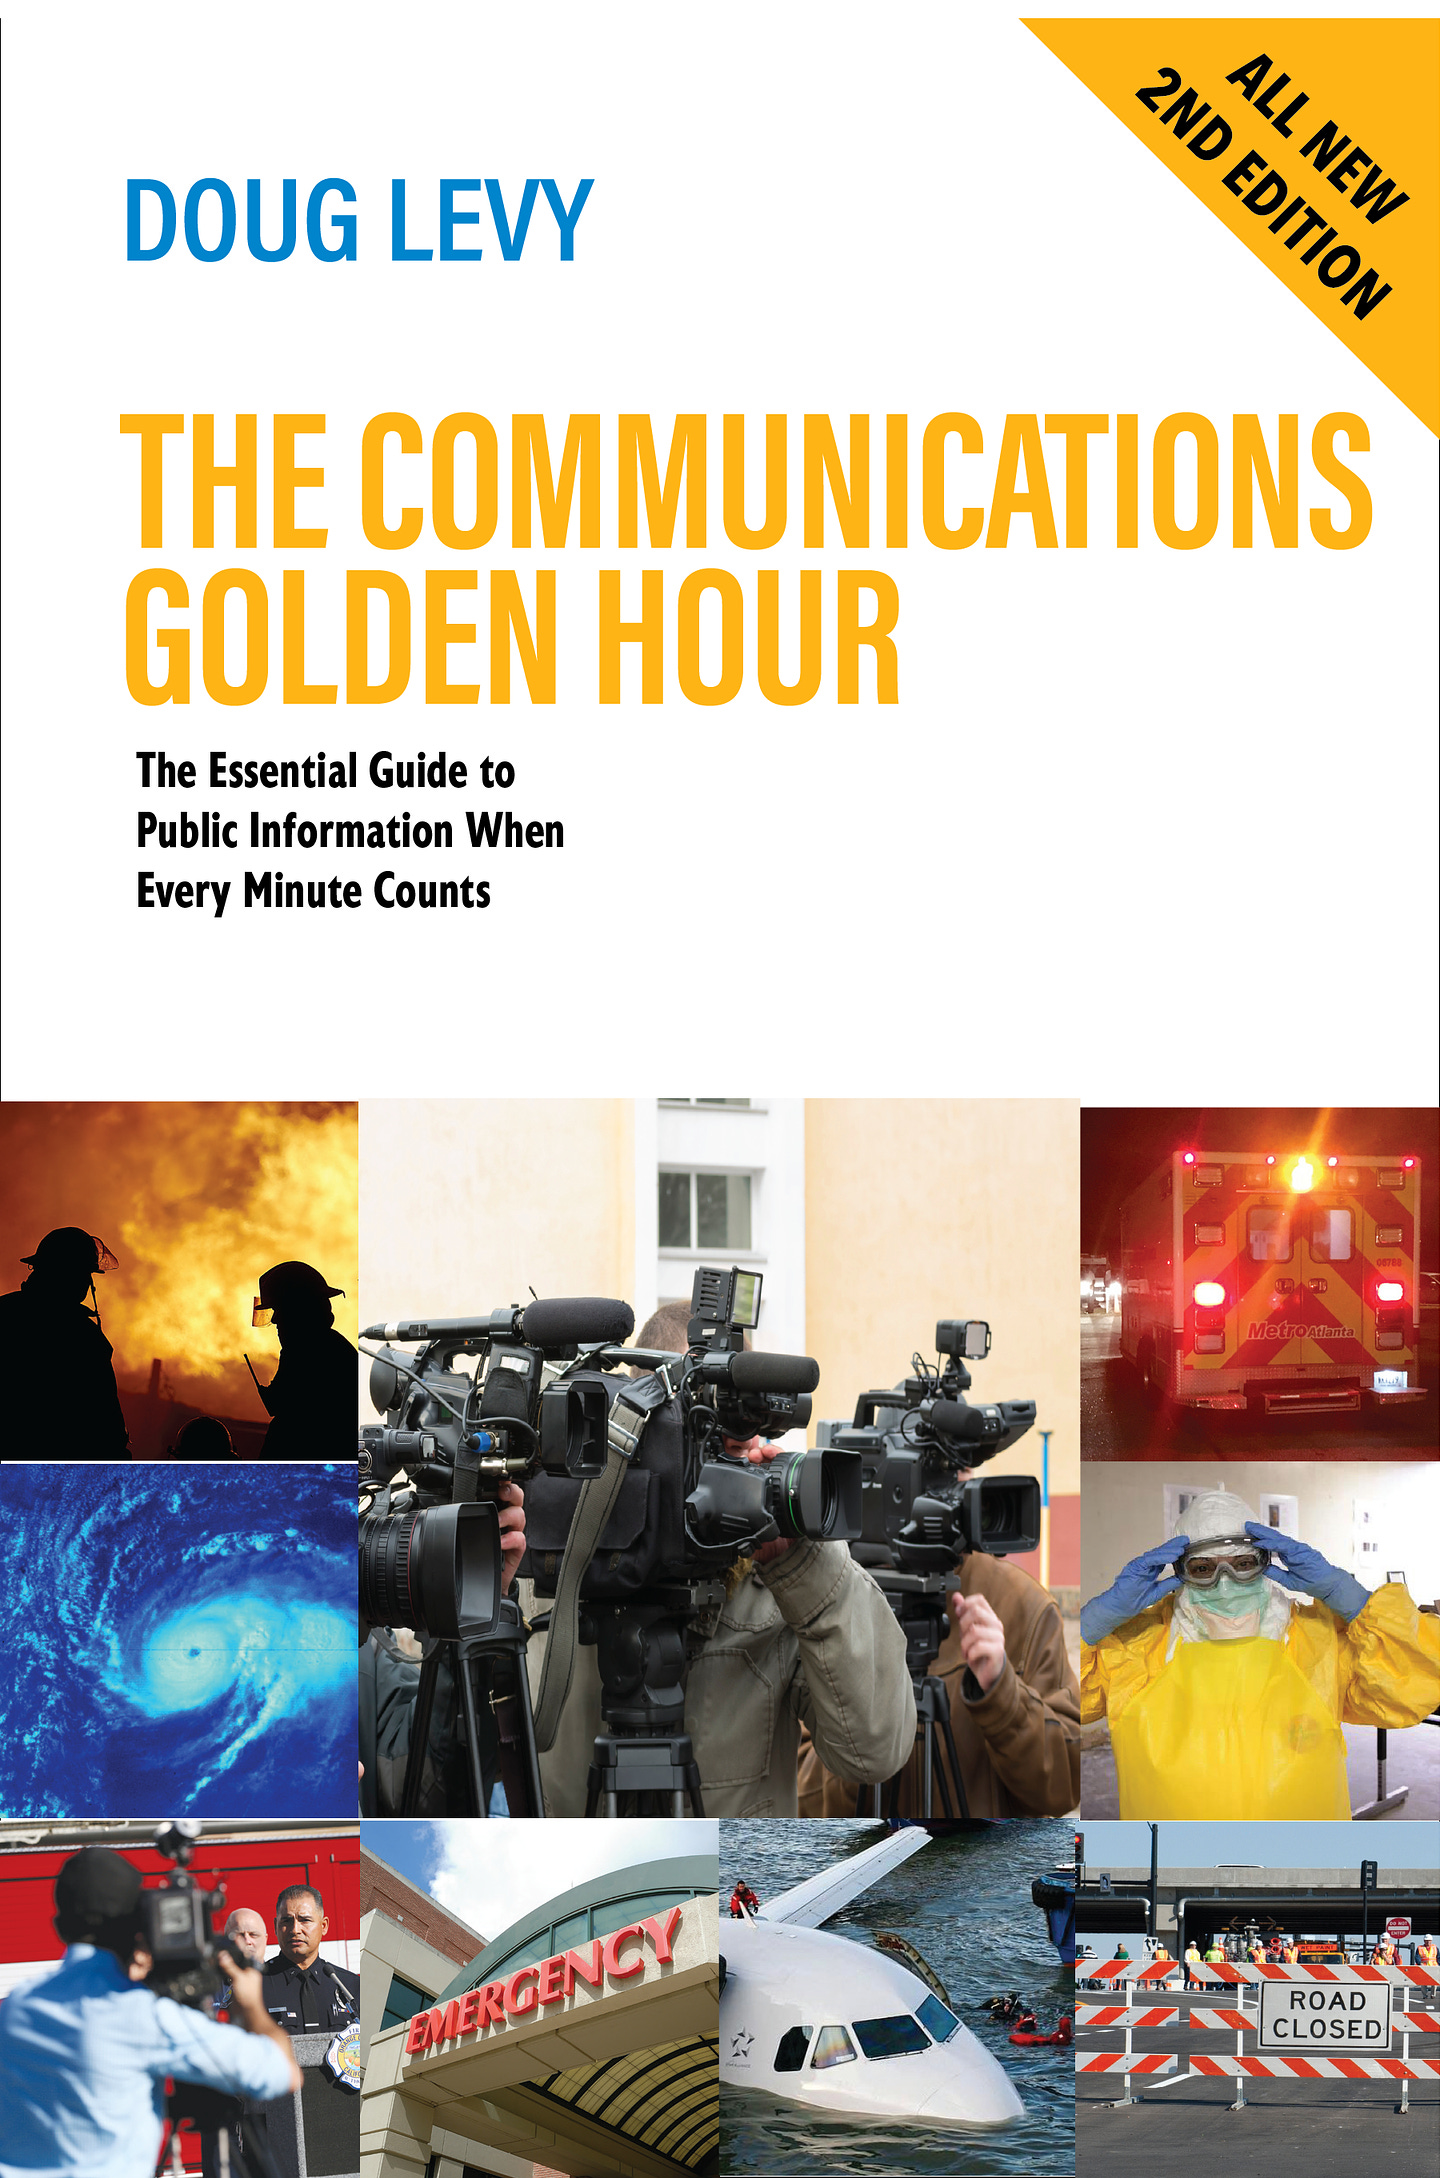 Cover of Communications Golden Hour 2nd edition book